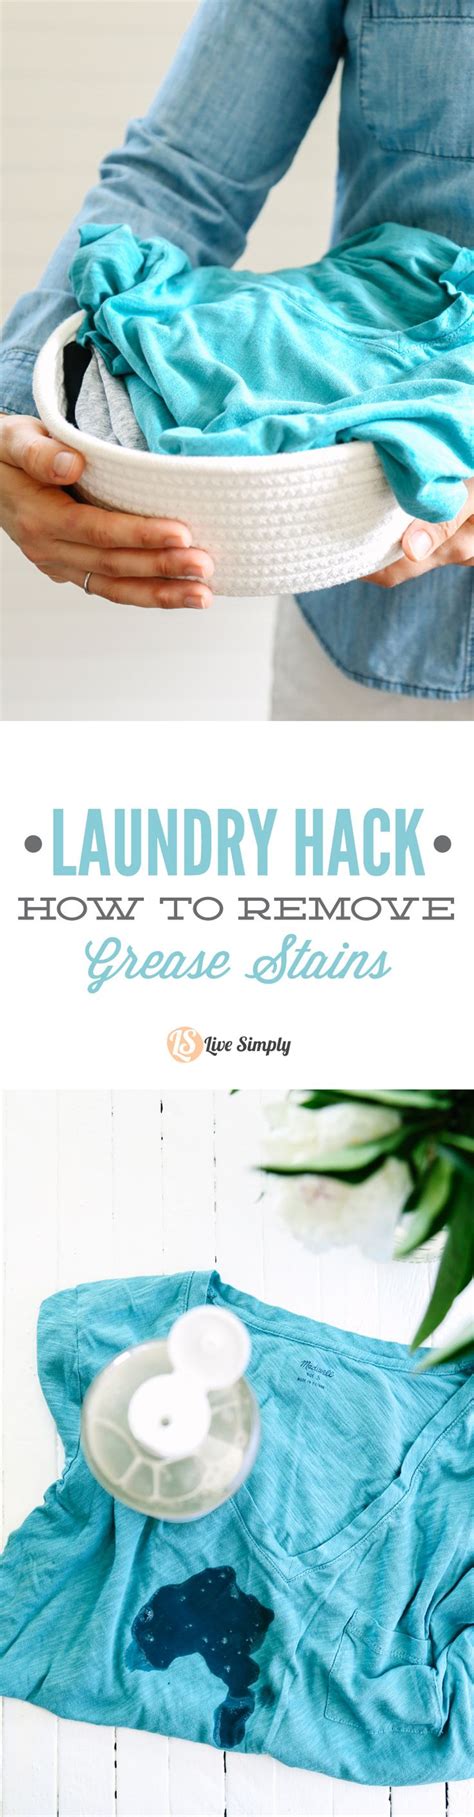 Laundry Hack How To Remove Grease Stains Remove Grease Stain Grease